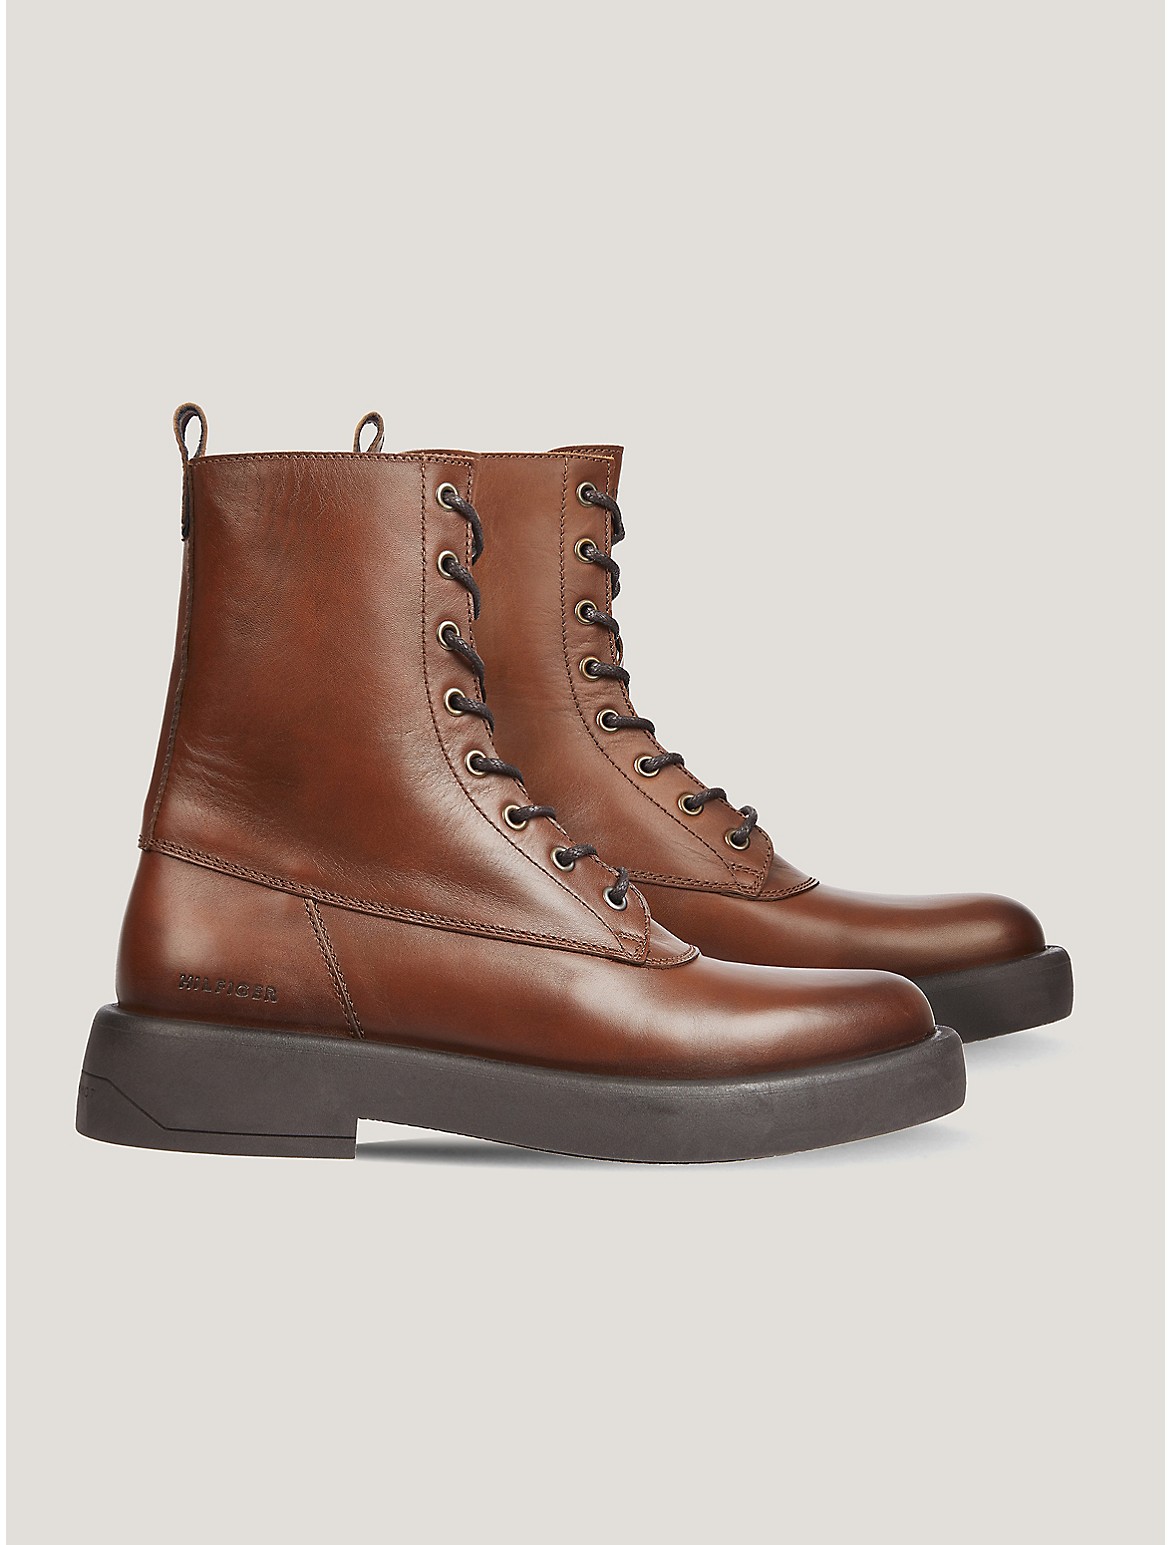 Tommy Hilfiger Cognac Leather Boot In Winter Cognac